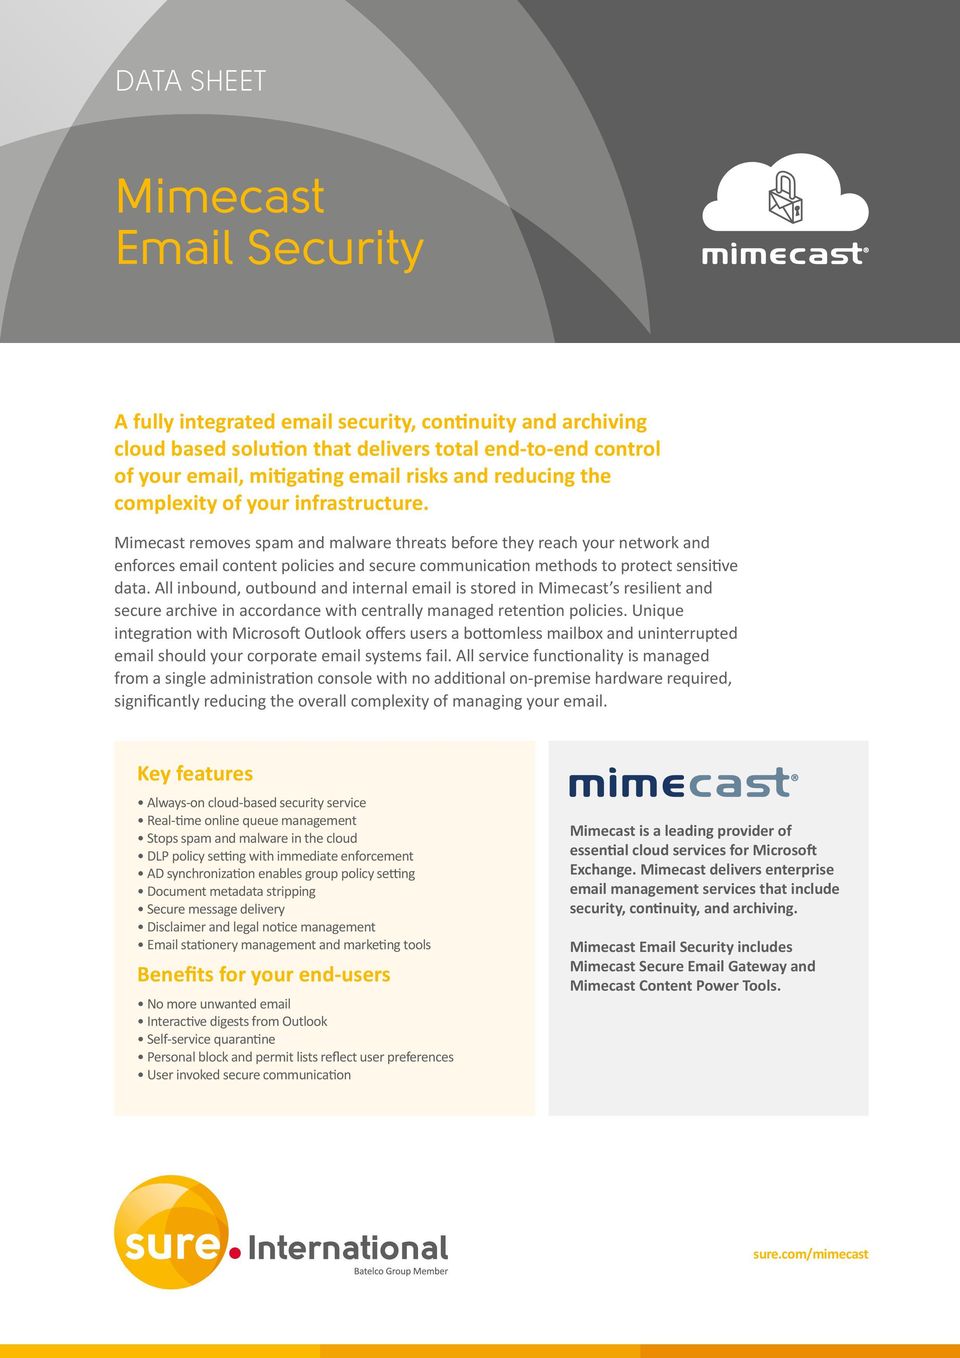 Mimecast removes spam and malware threats before they reach your network and enforces email content policies and secure communication methods to protect sensitive data.